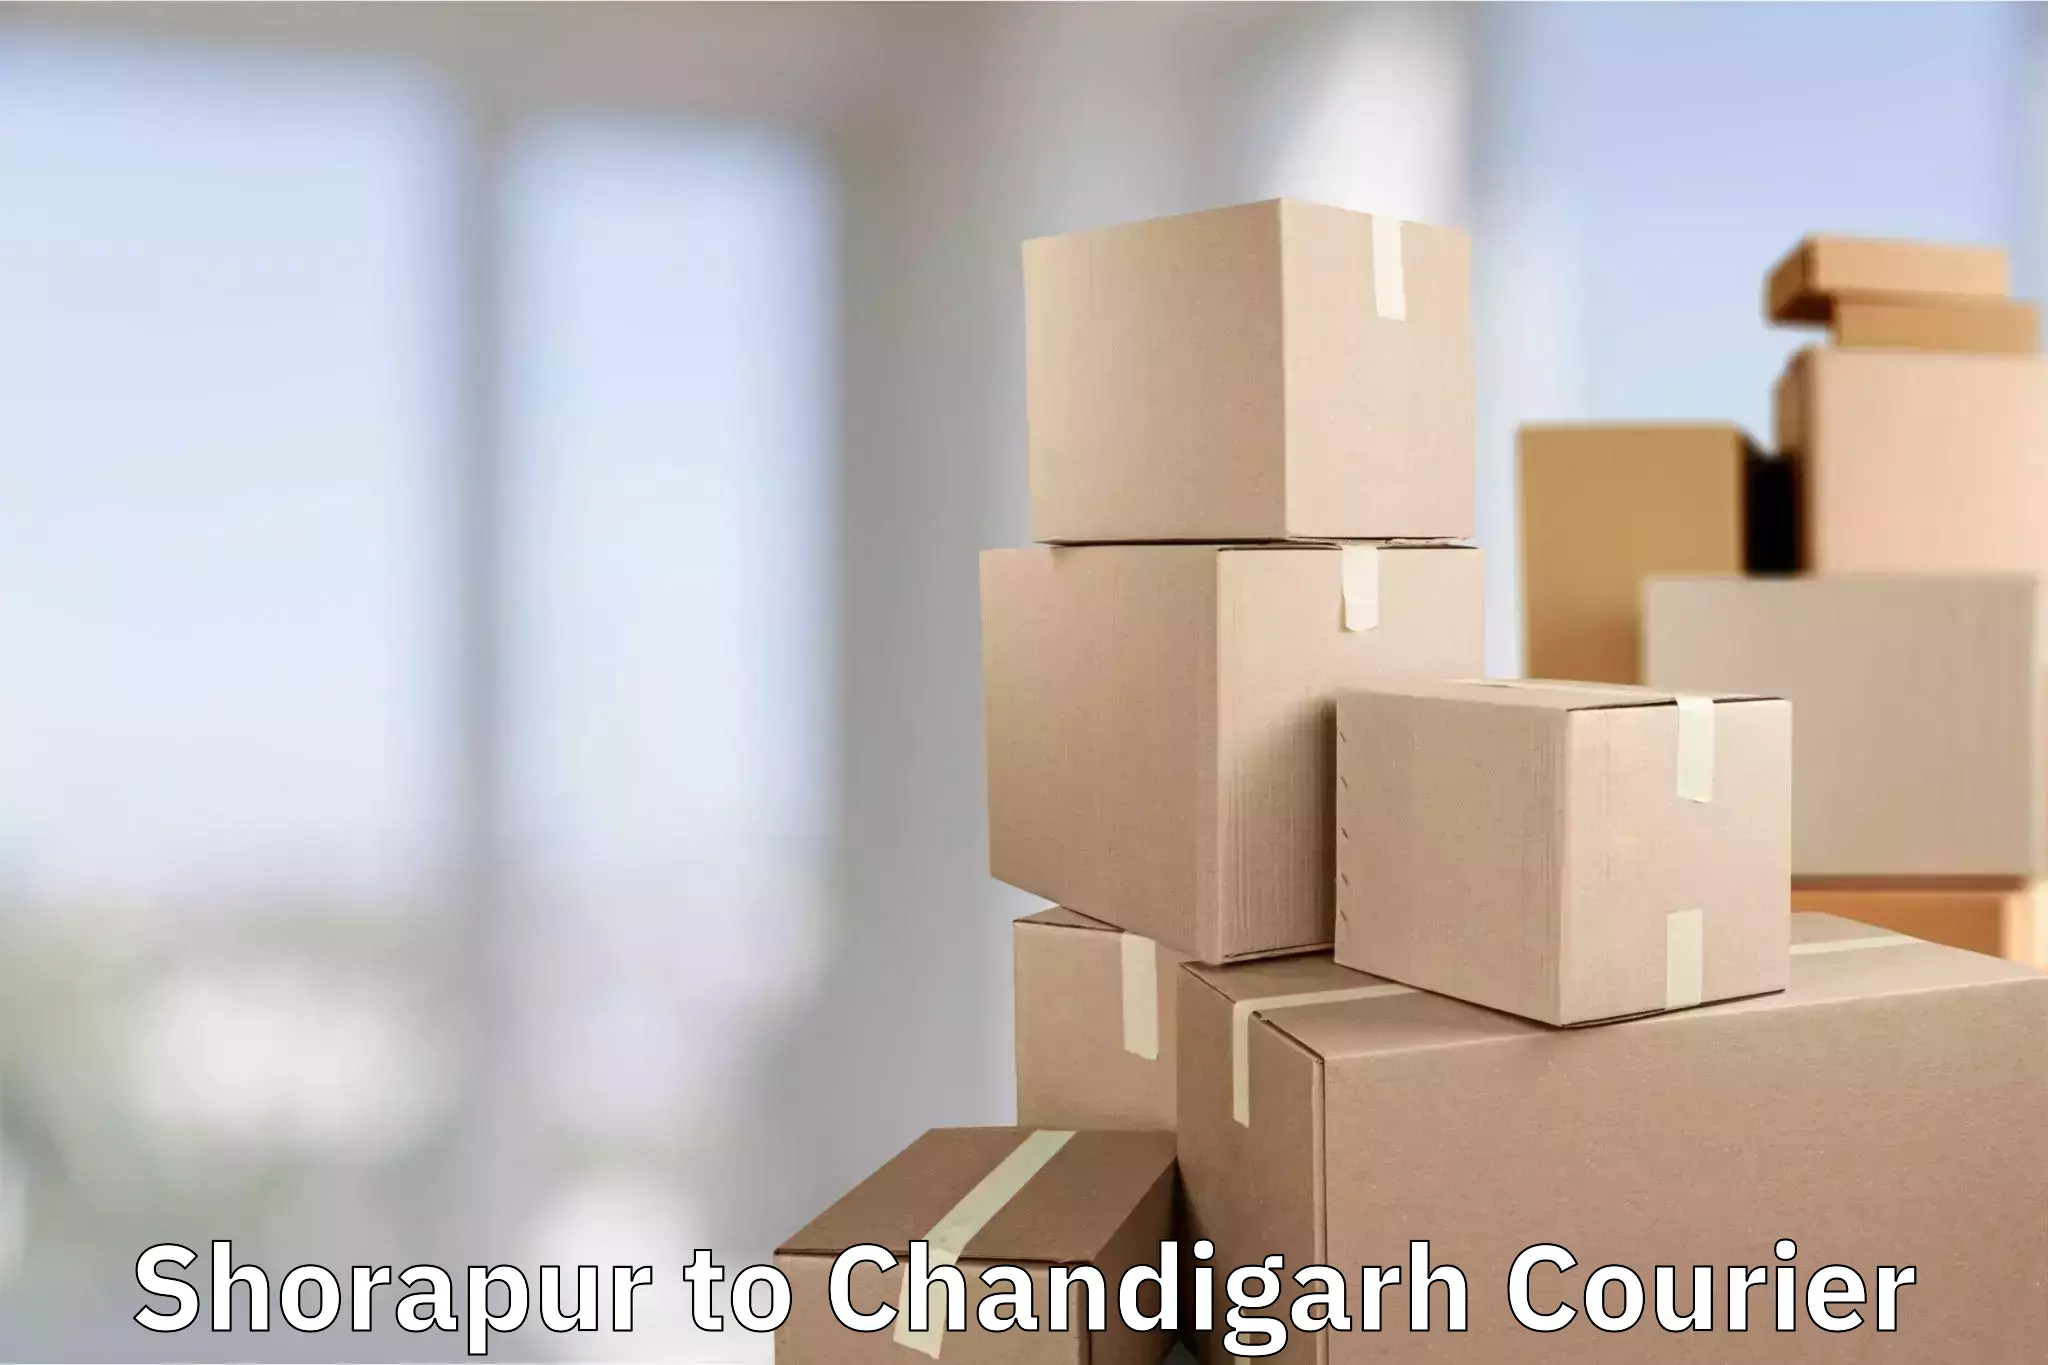 High-quality baggage shipment in Shorapur to Chandigarh